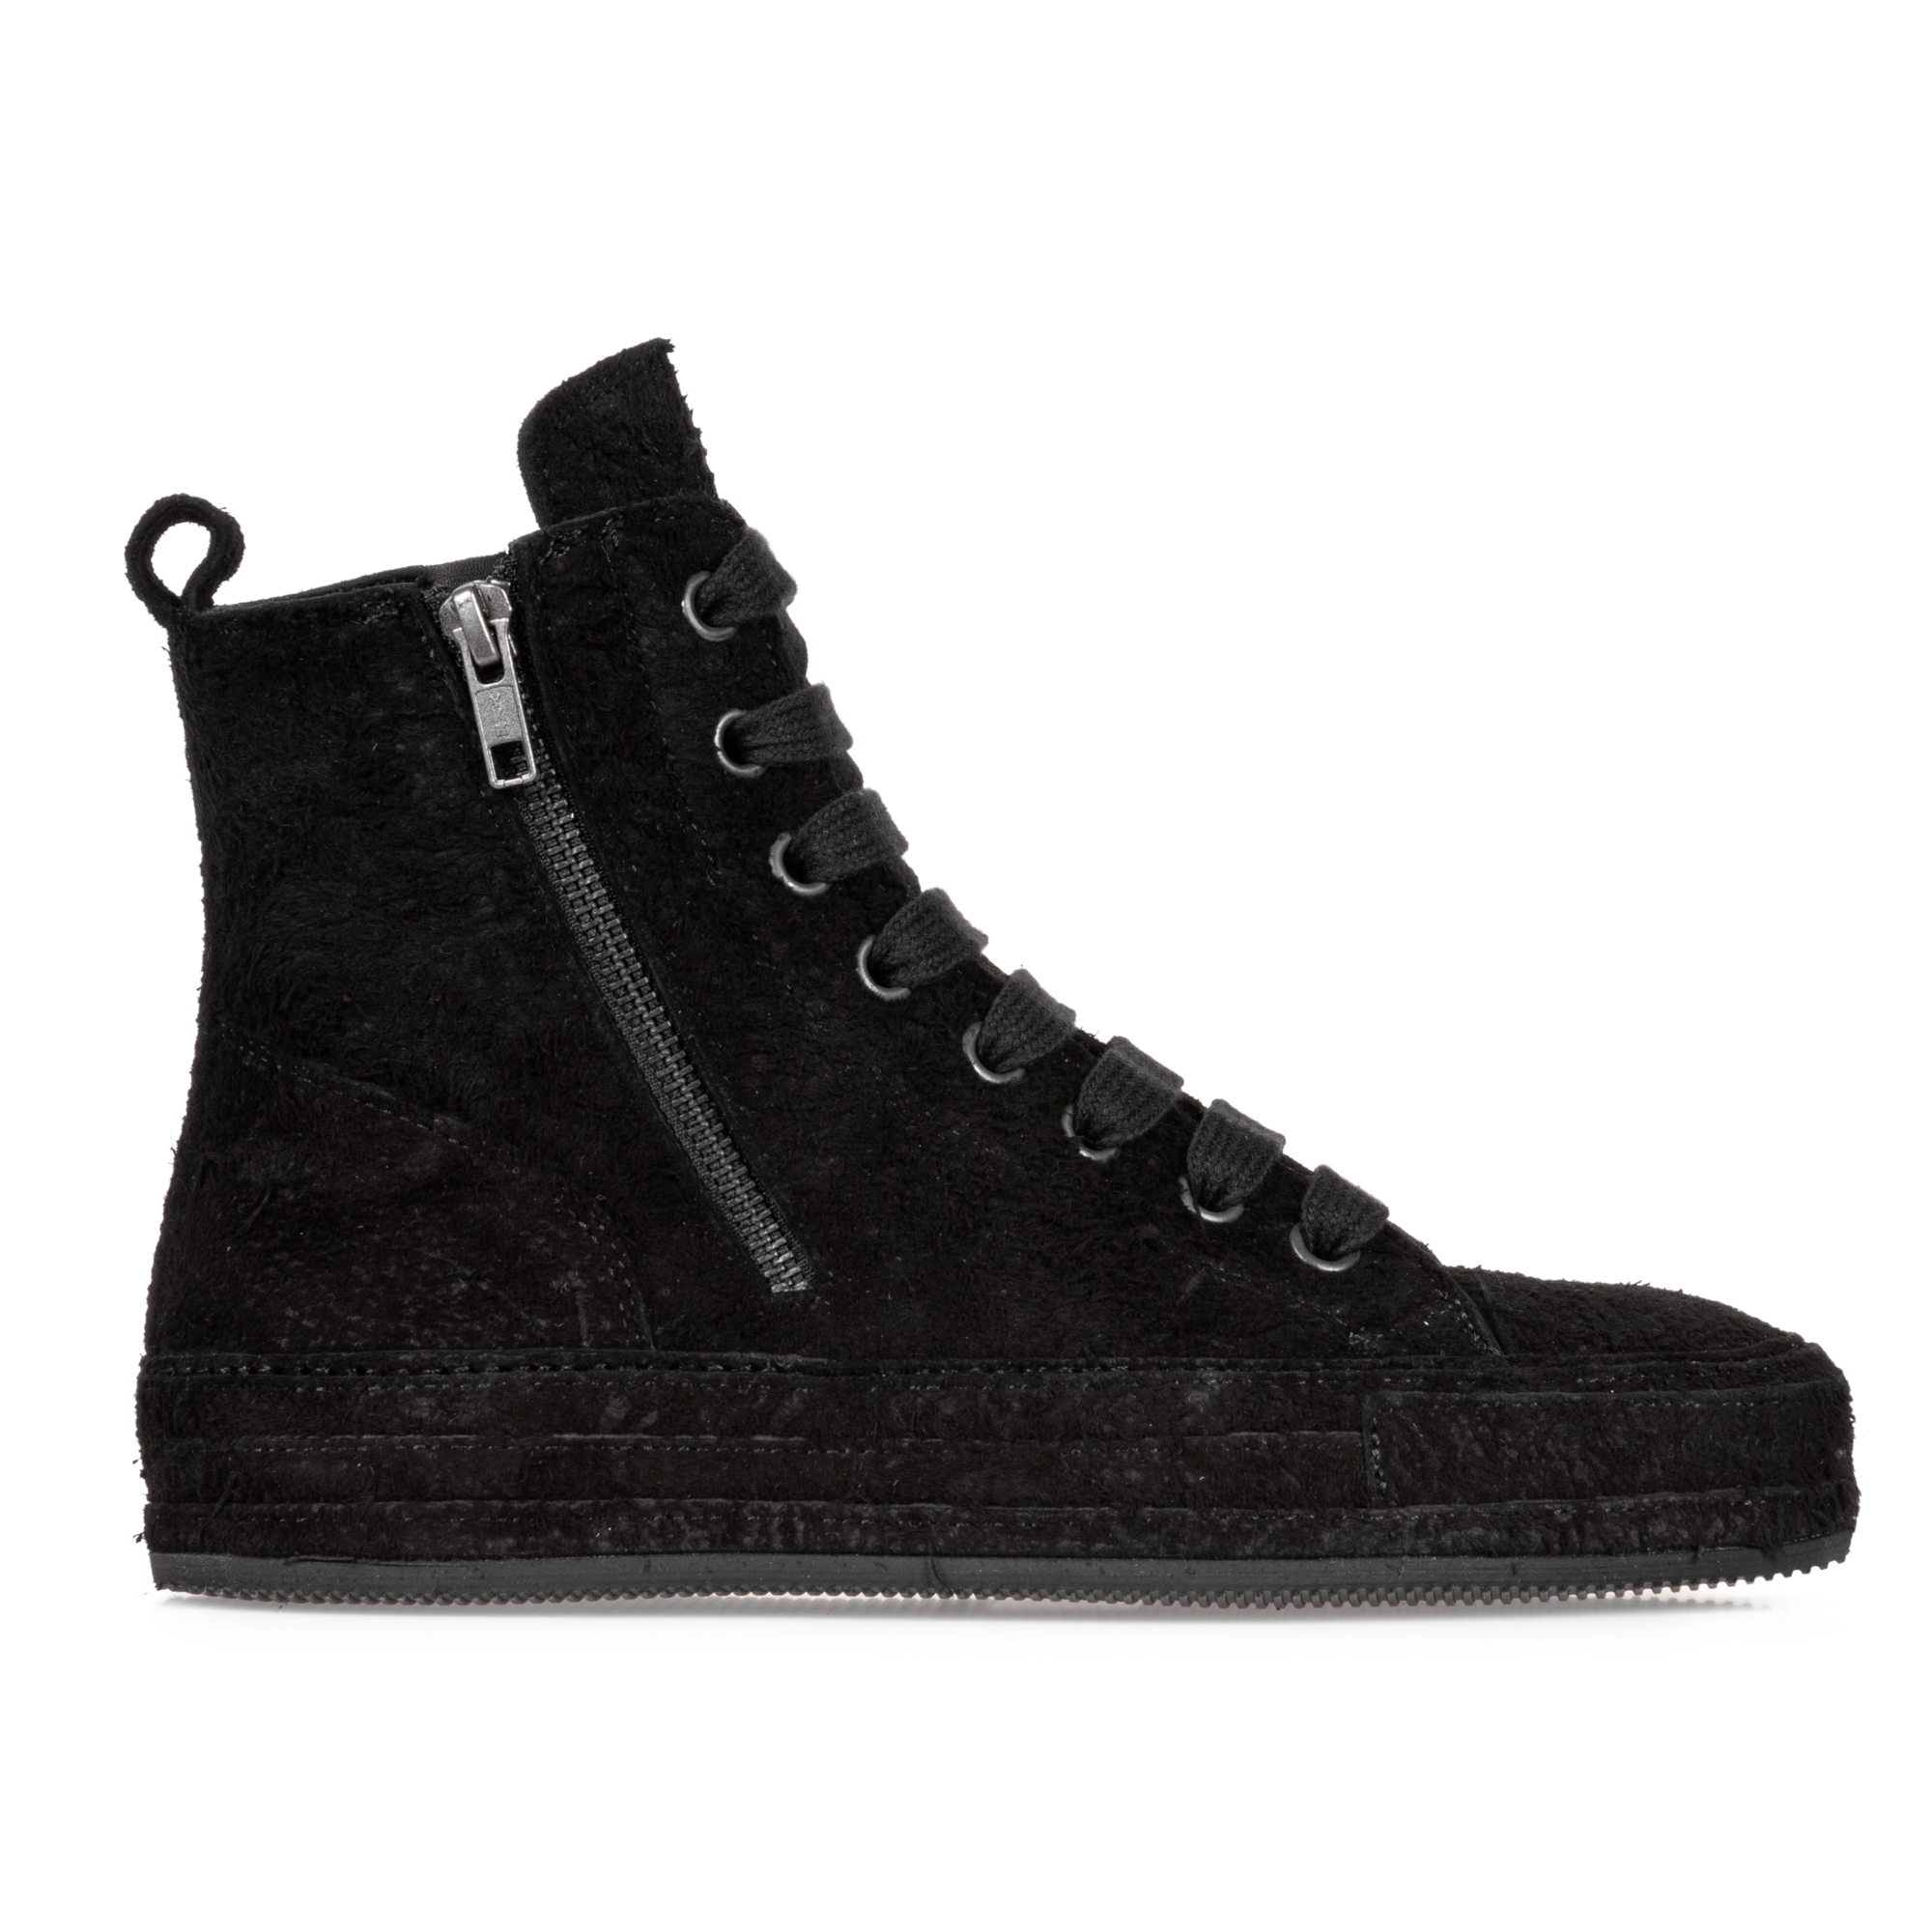 BLACK W SUEDE LEATHER HIGH TOP SNEAKERS|wolfensson